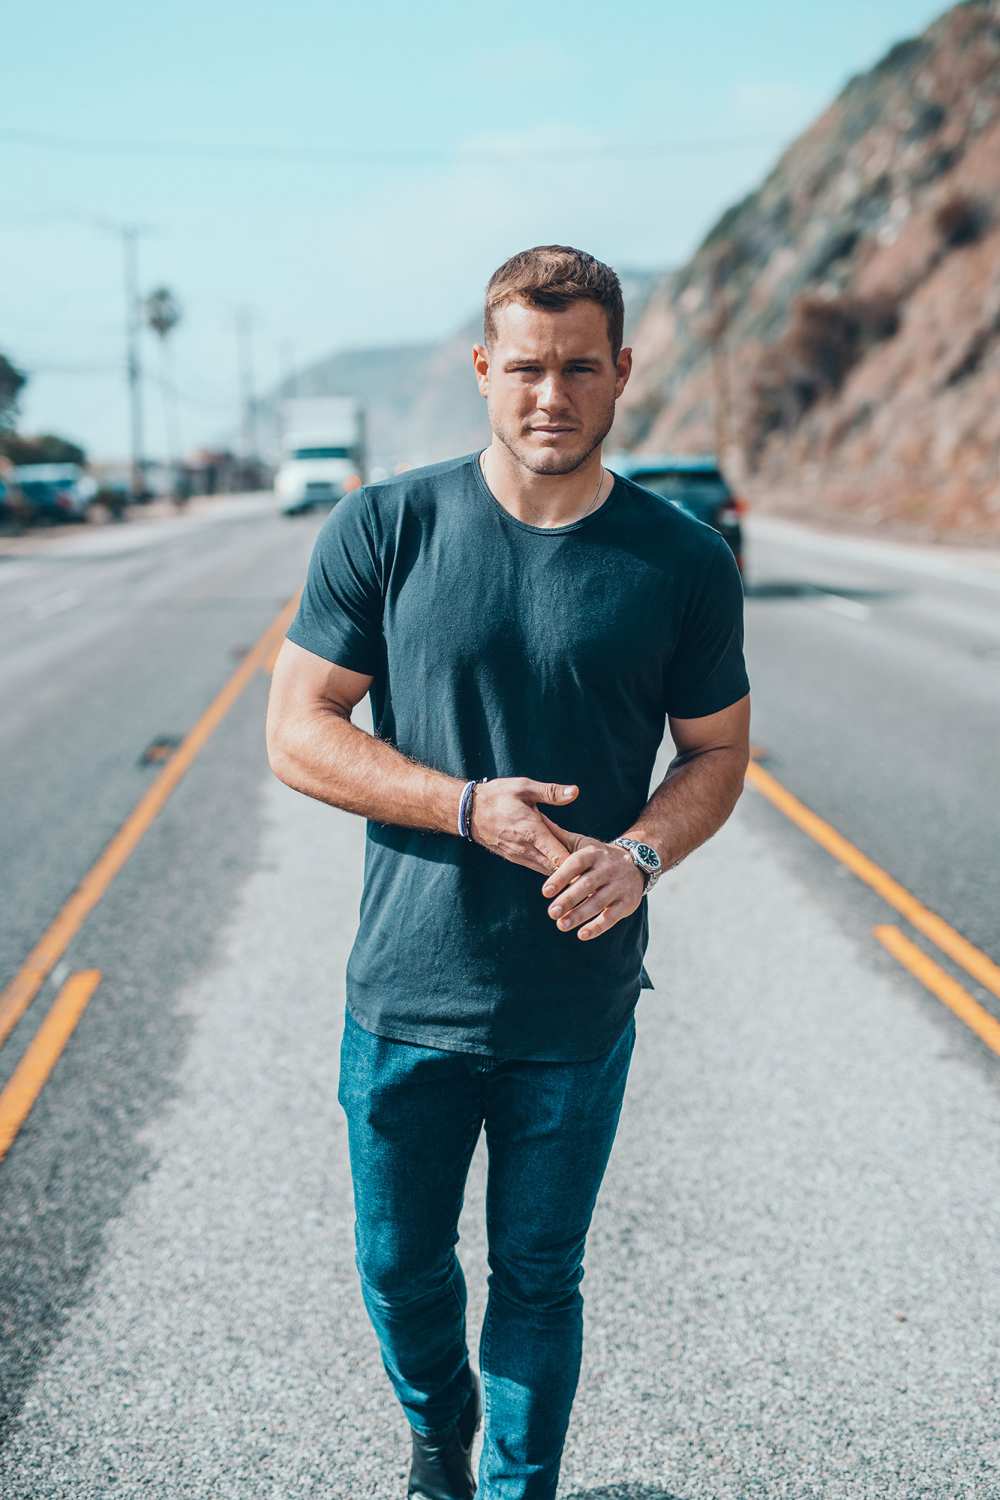 Bachelor Colton Underwood Has a New Line of Bracelets for a Good Cause